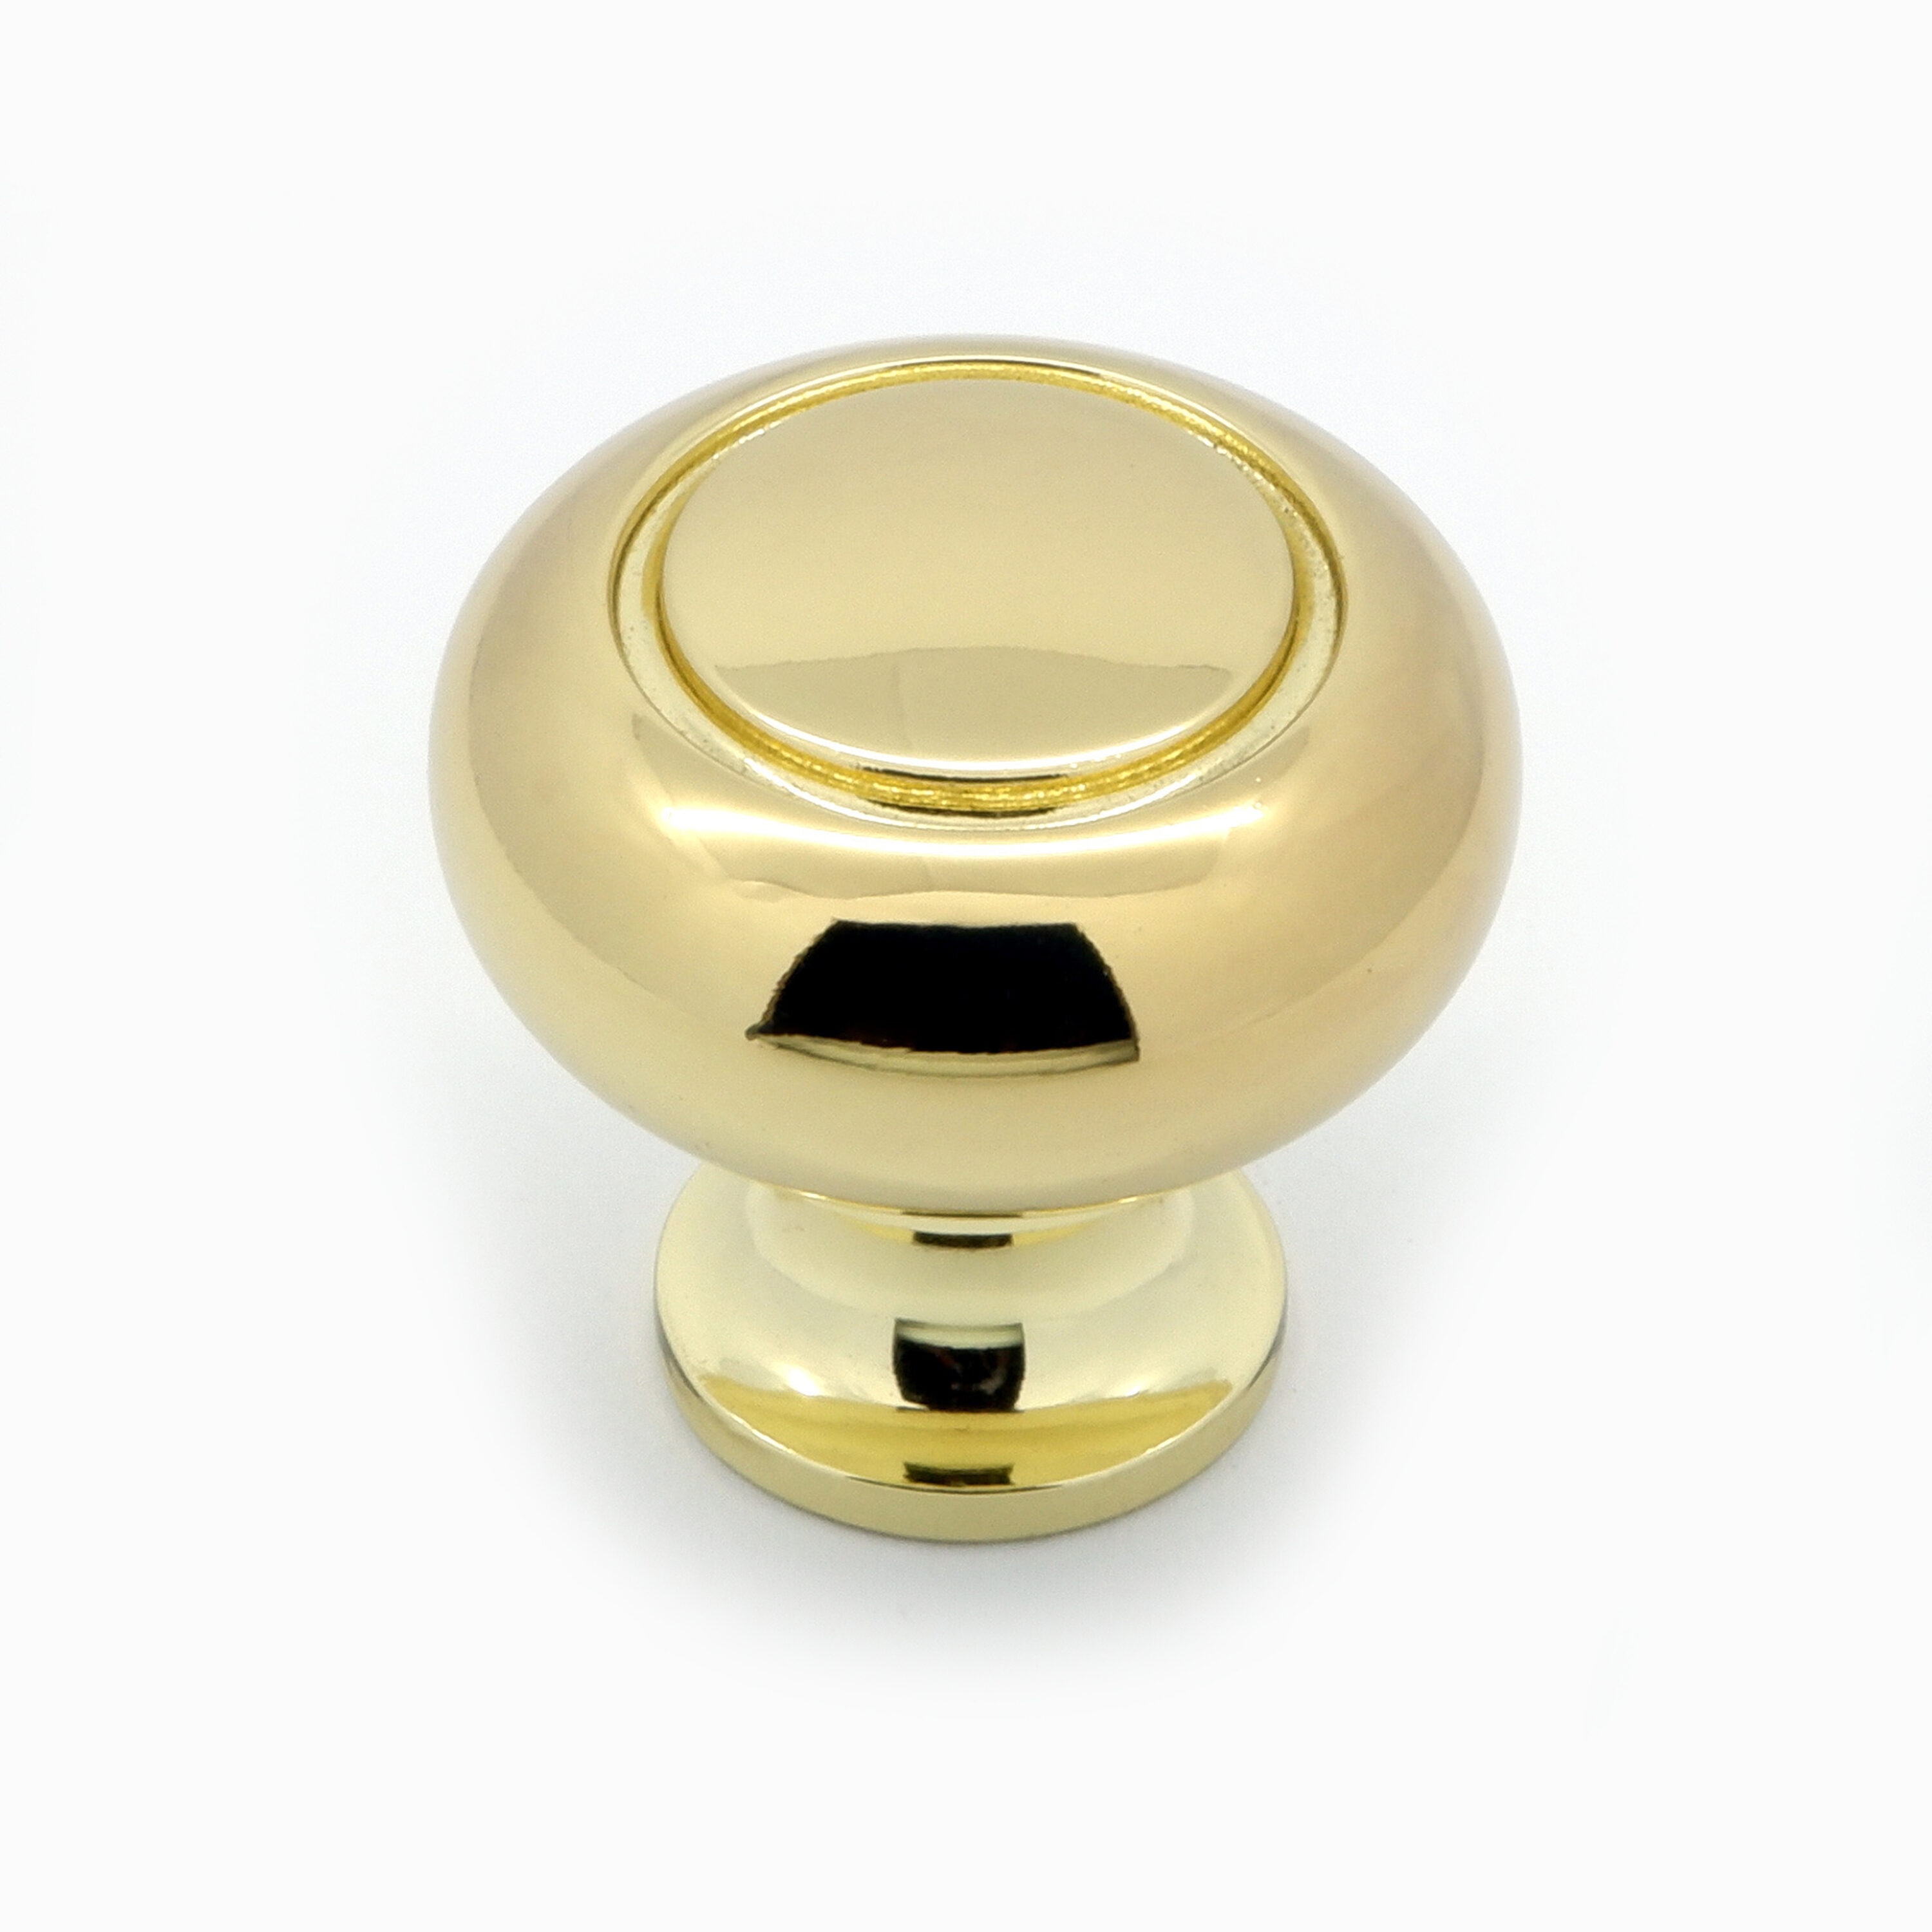 allen + roth 1-1/4-in Polished Brass Round Contemporary Cabinet Knob